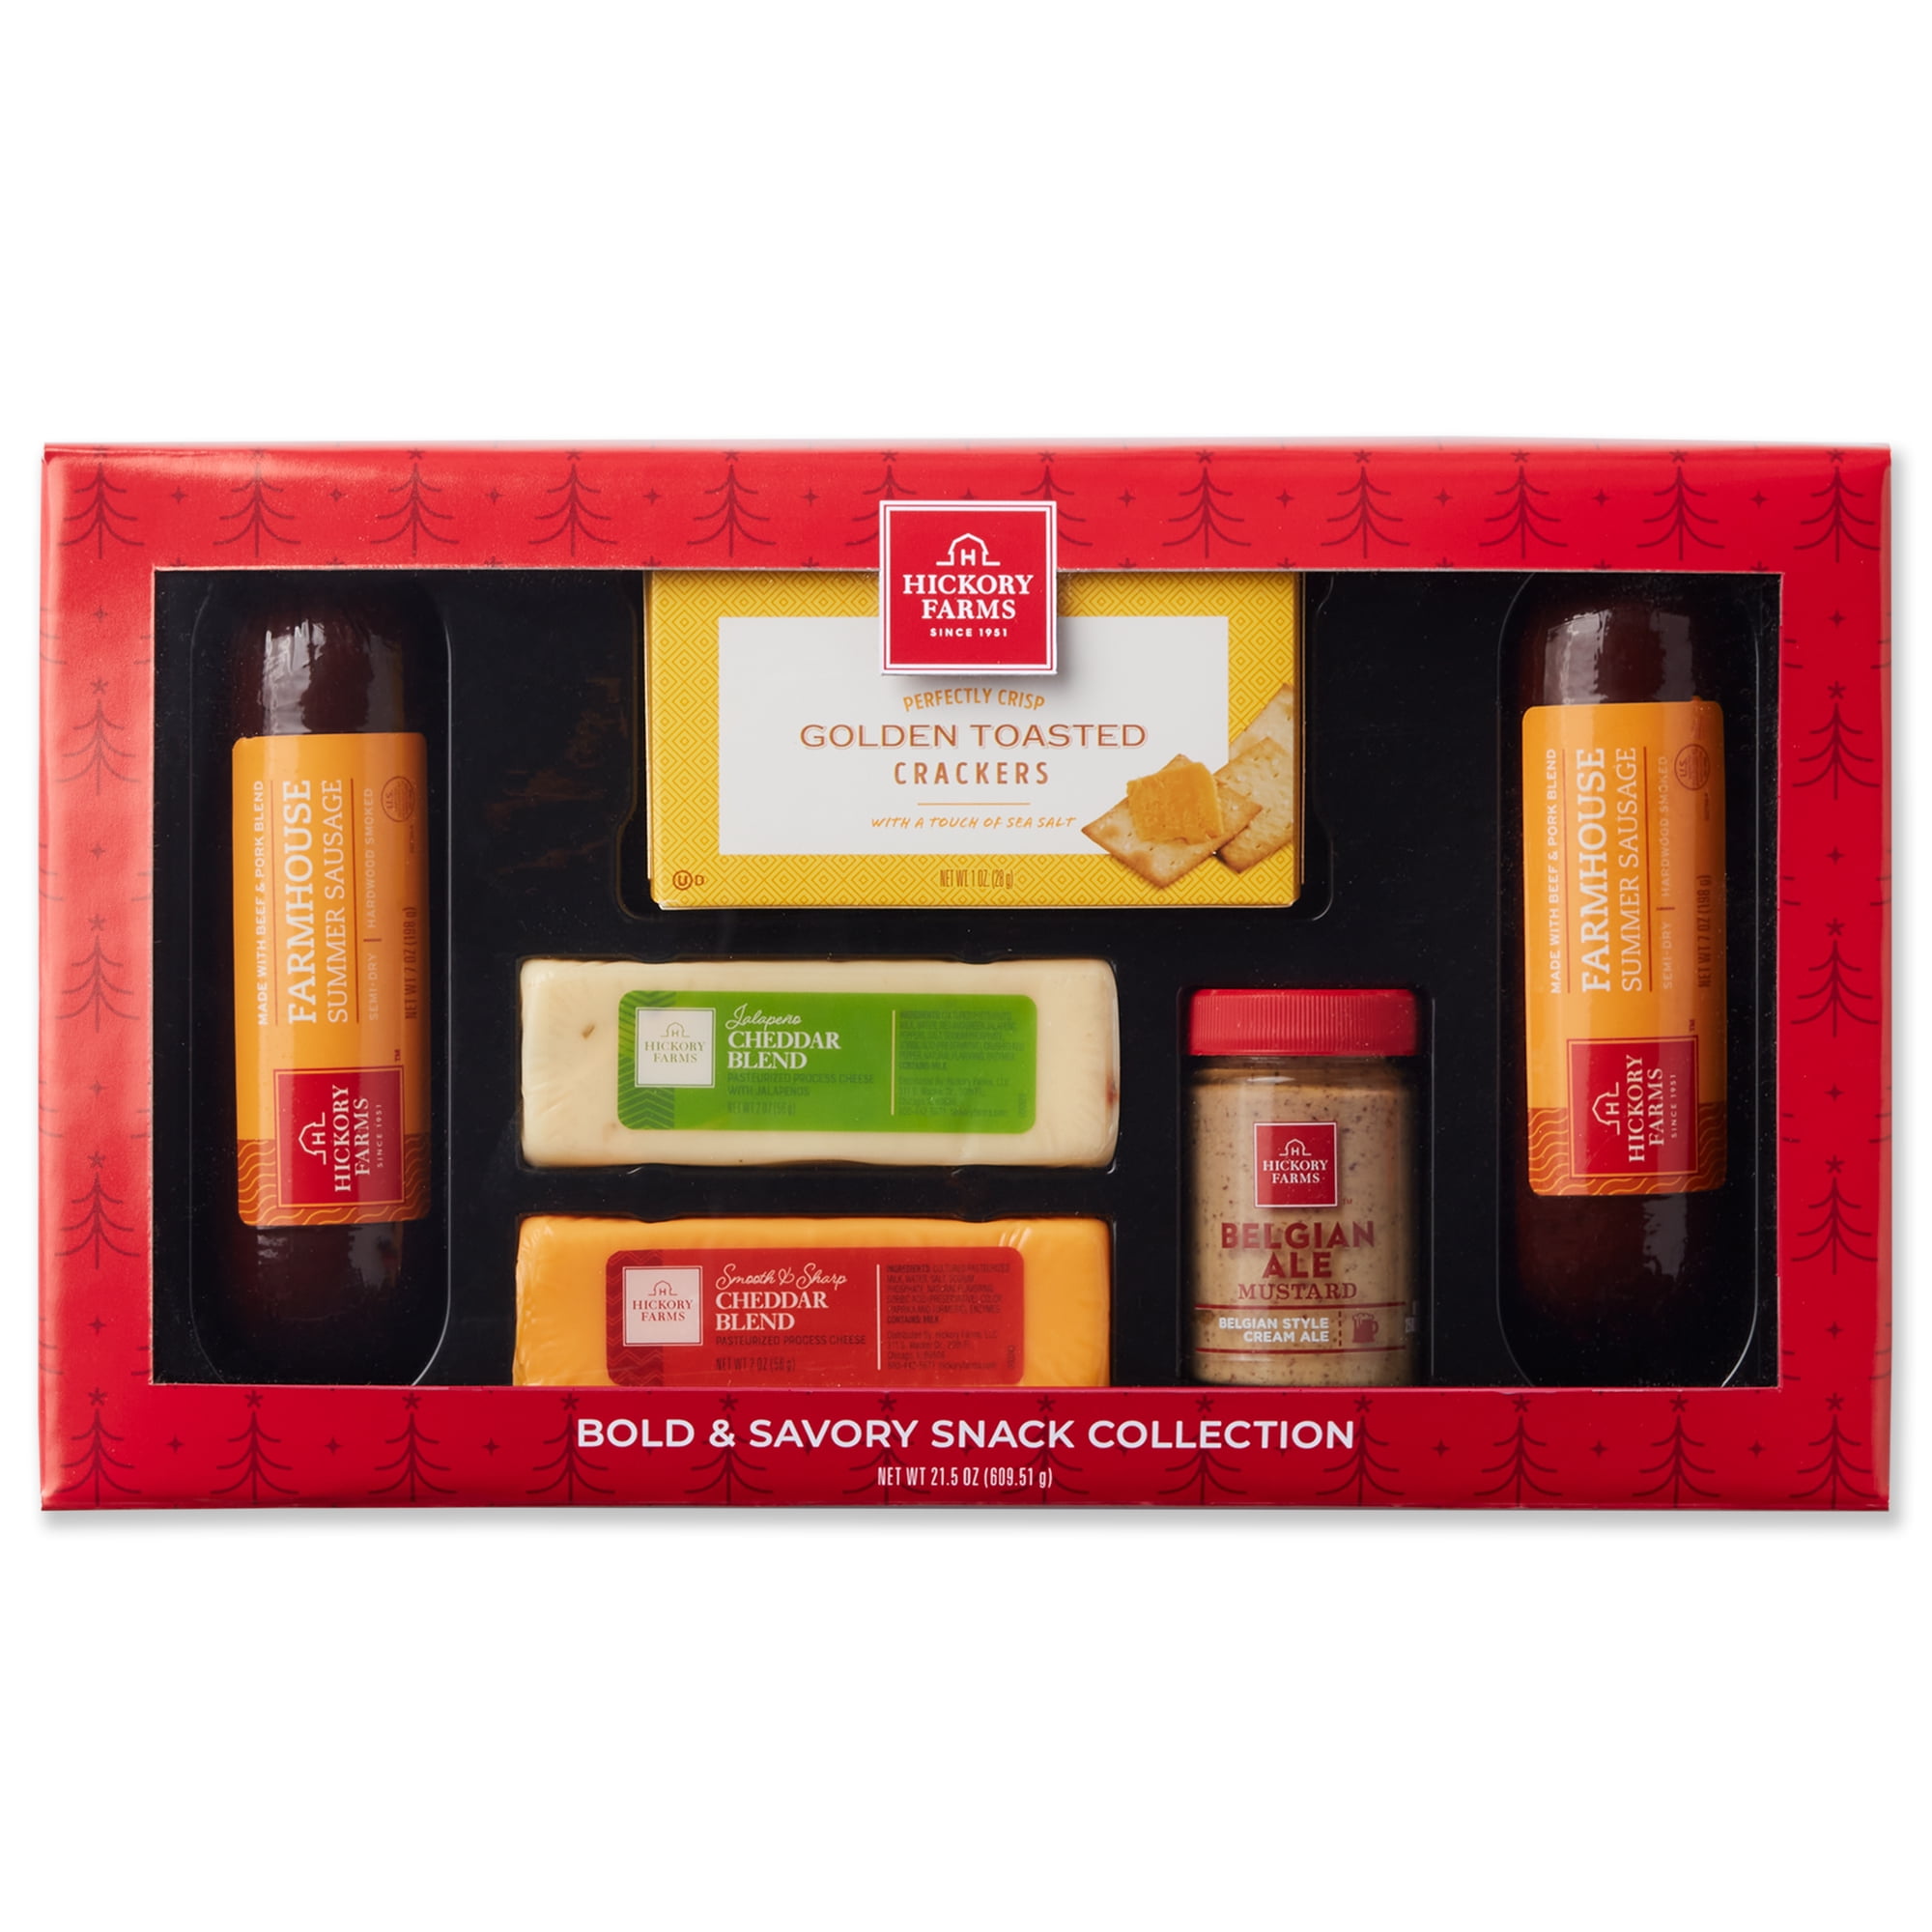 Hickory Farms Bold & Savory Snack Collection Gift 21.5 oz - 6 Pieces 